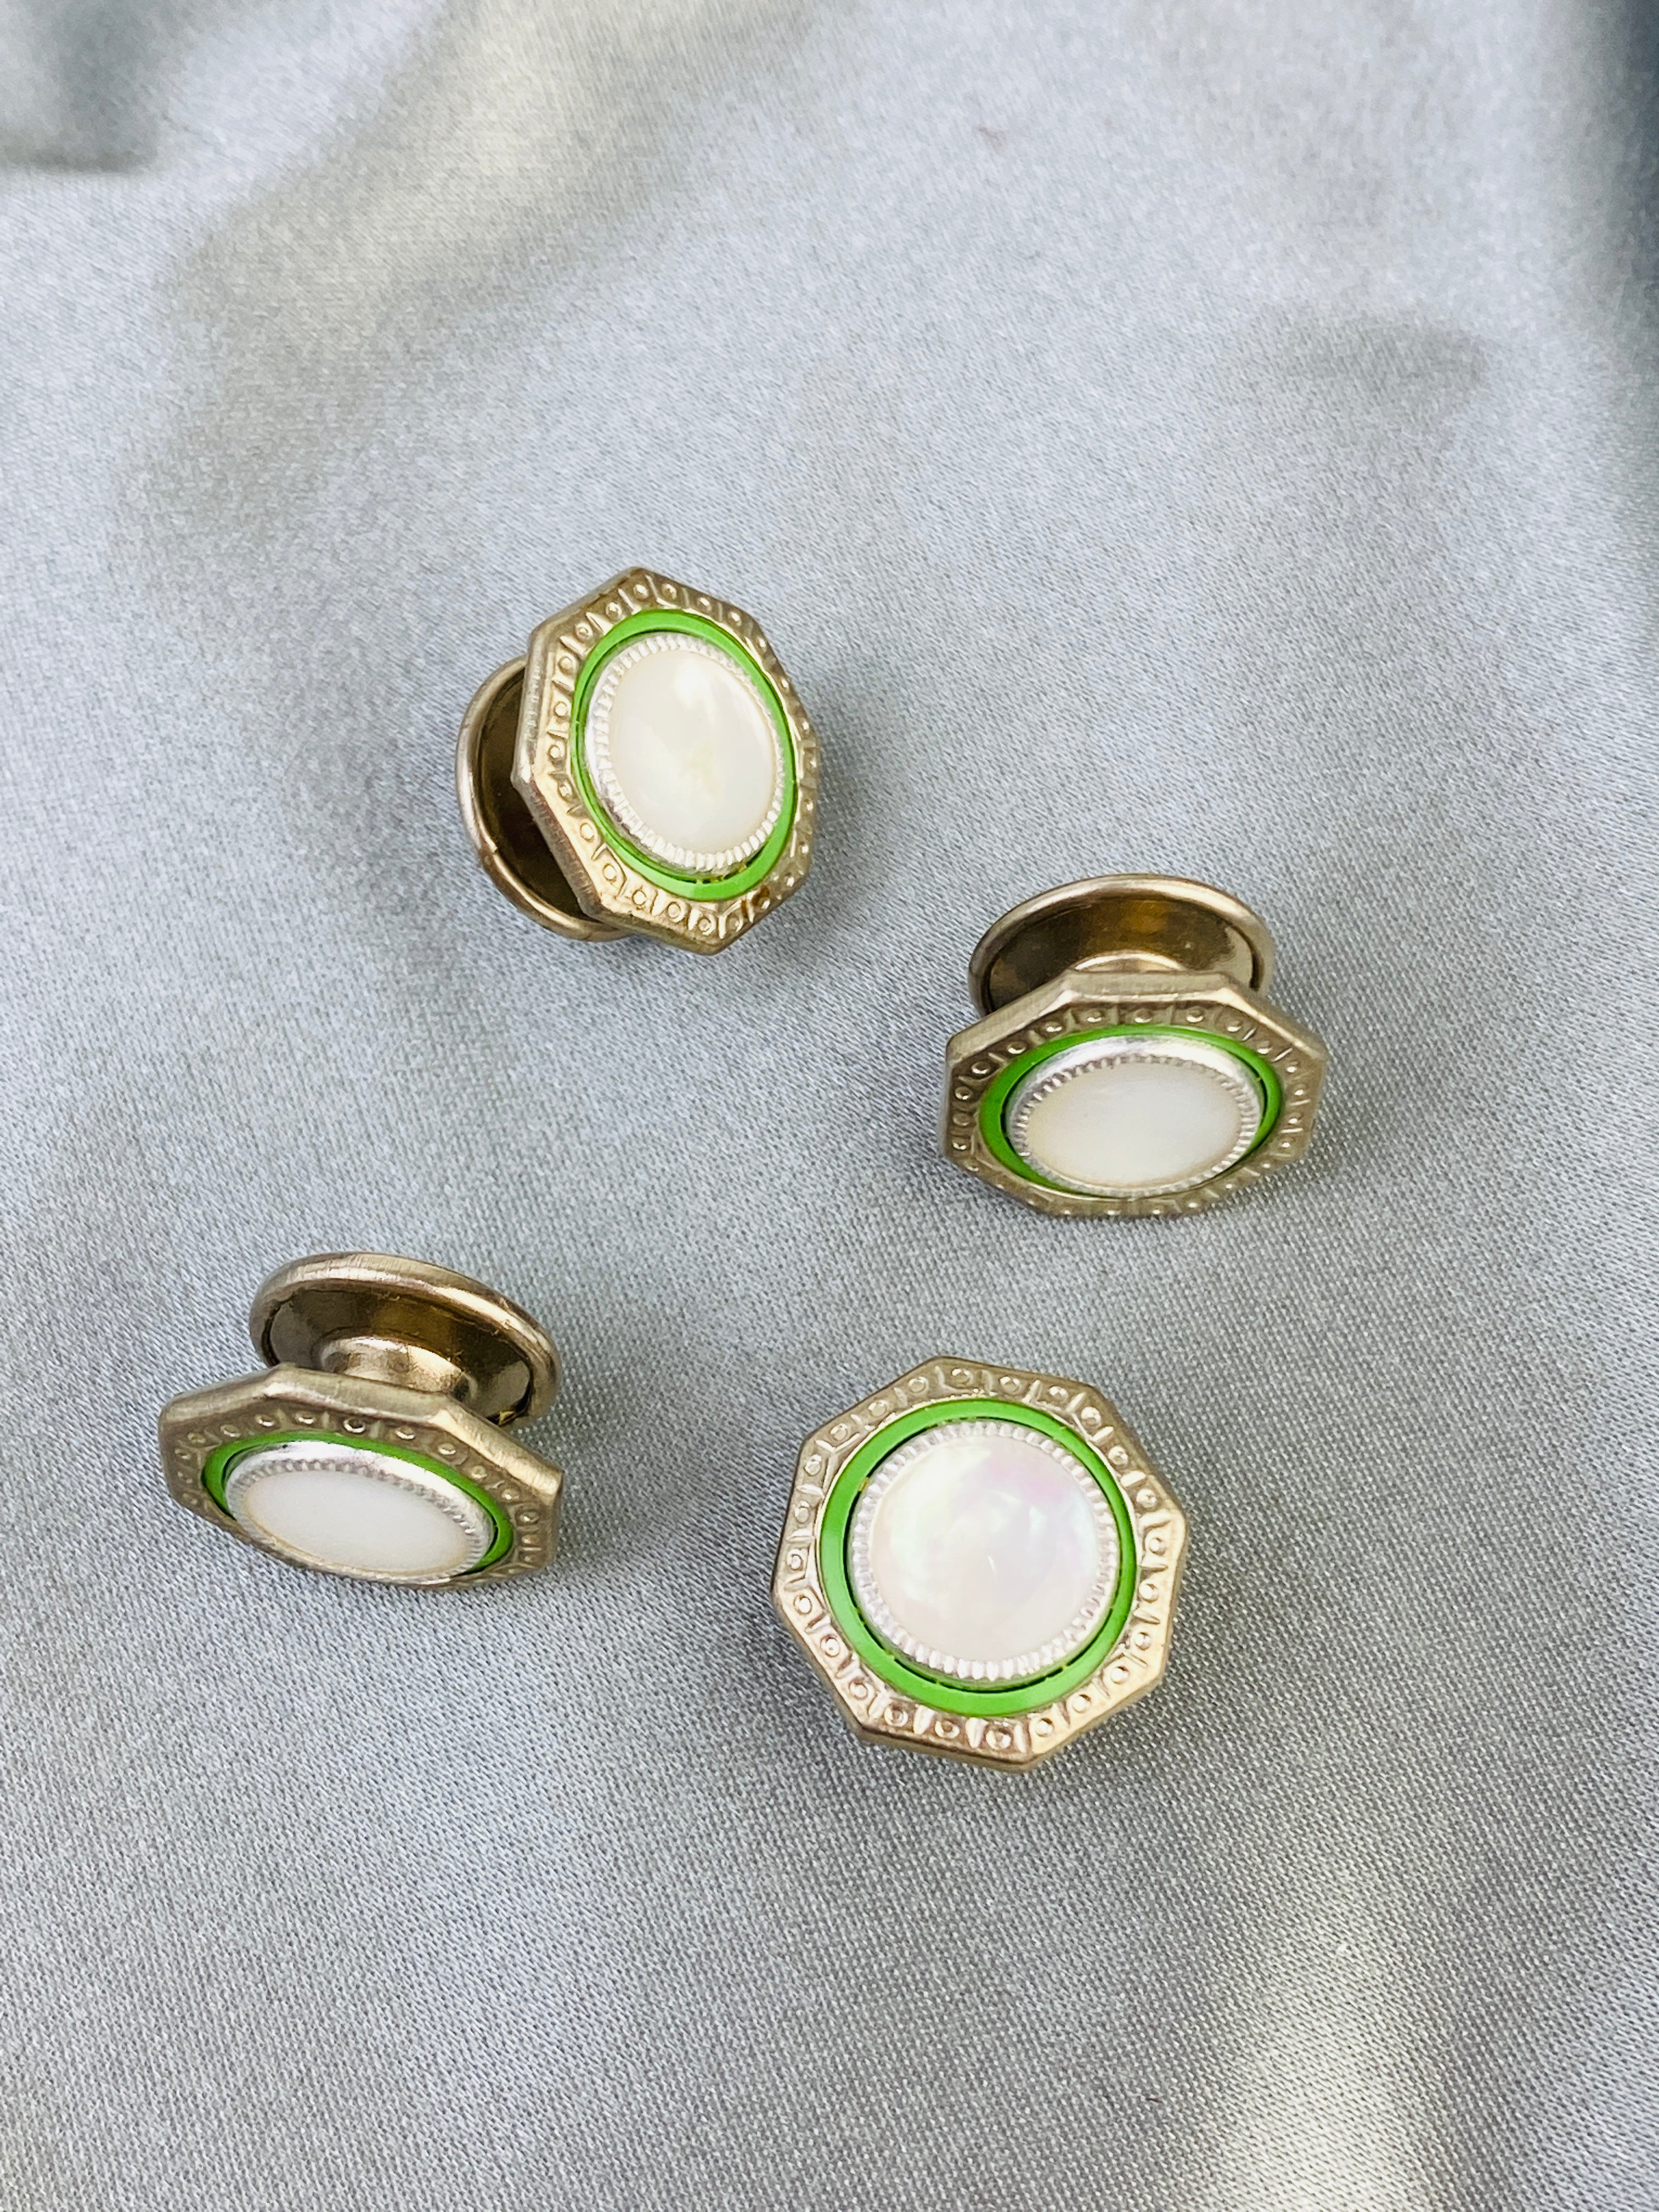 Vintage 1920s Art Deco Silver Octagonal Cufflinks, Green Celluloid & Mother  of Pearl, Snap Link